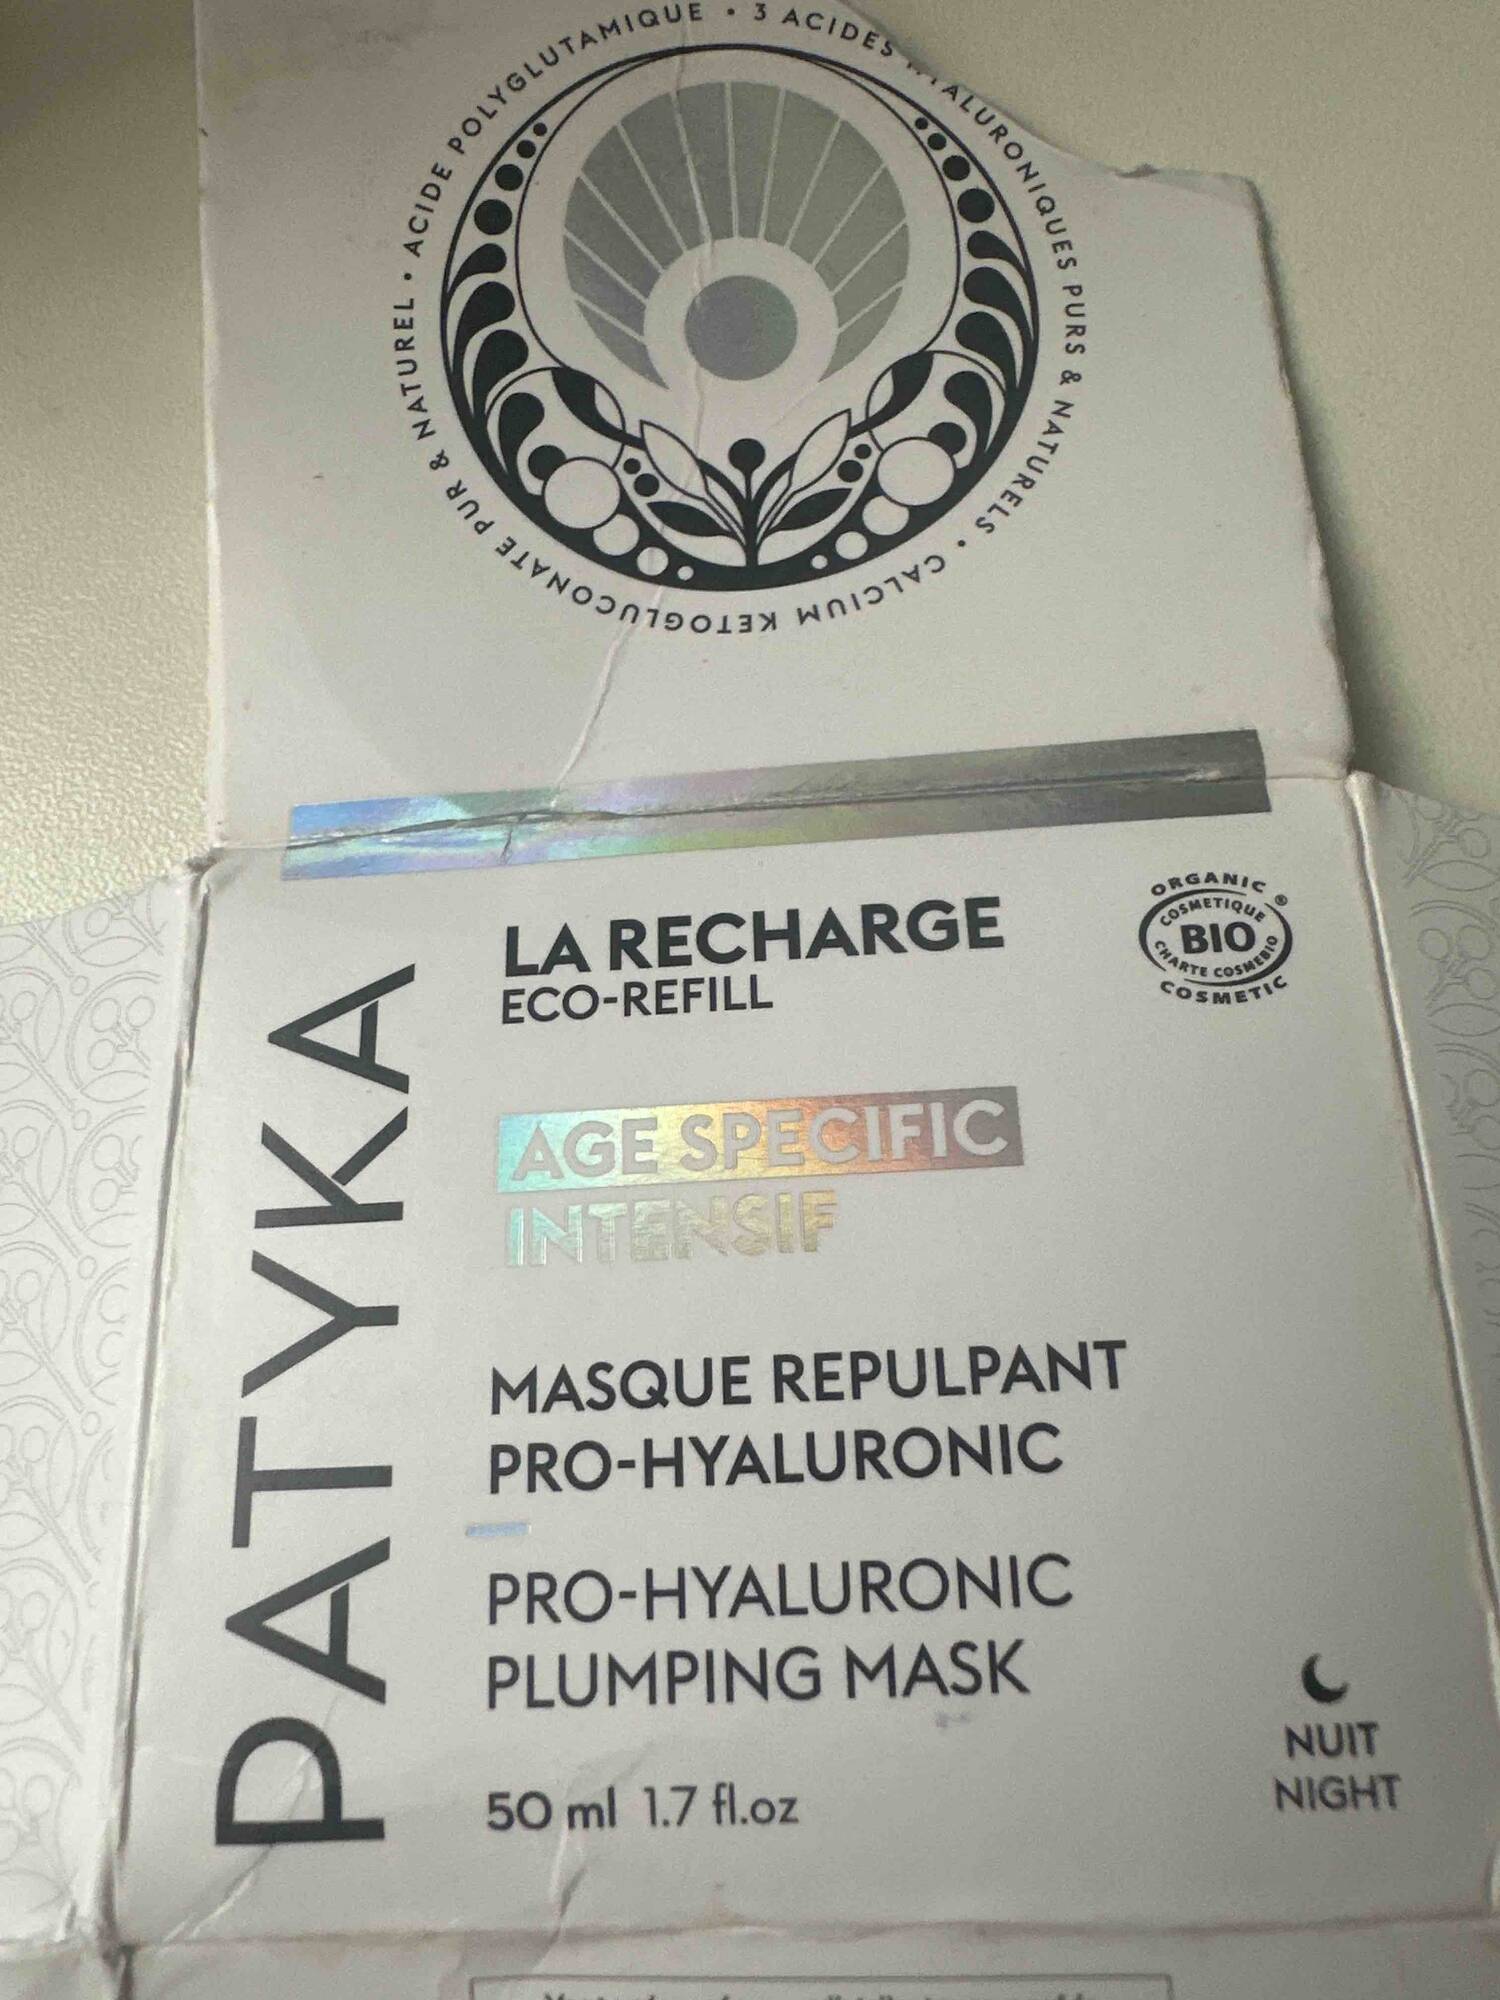 PATYKA - Age specific intensif - Masque repulpant pro-hyaluronic nuit